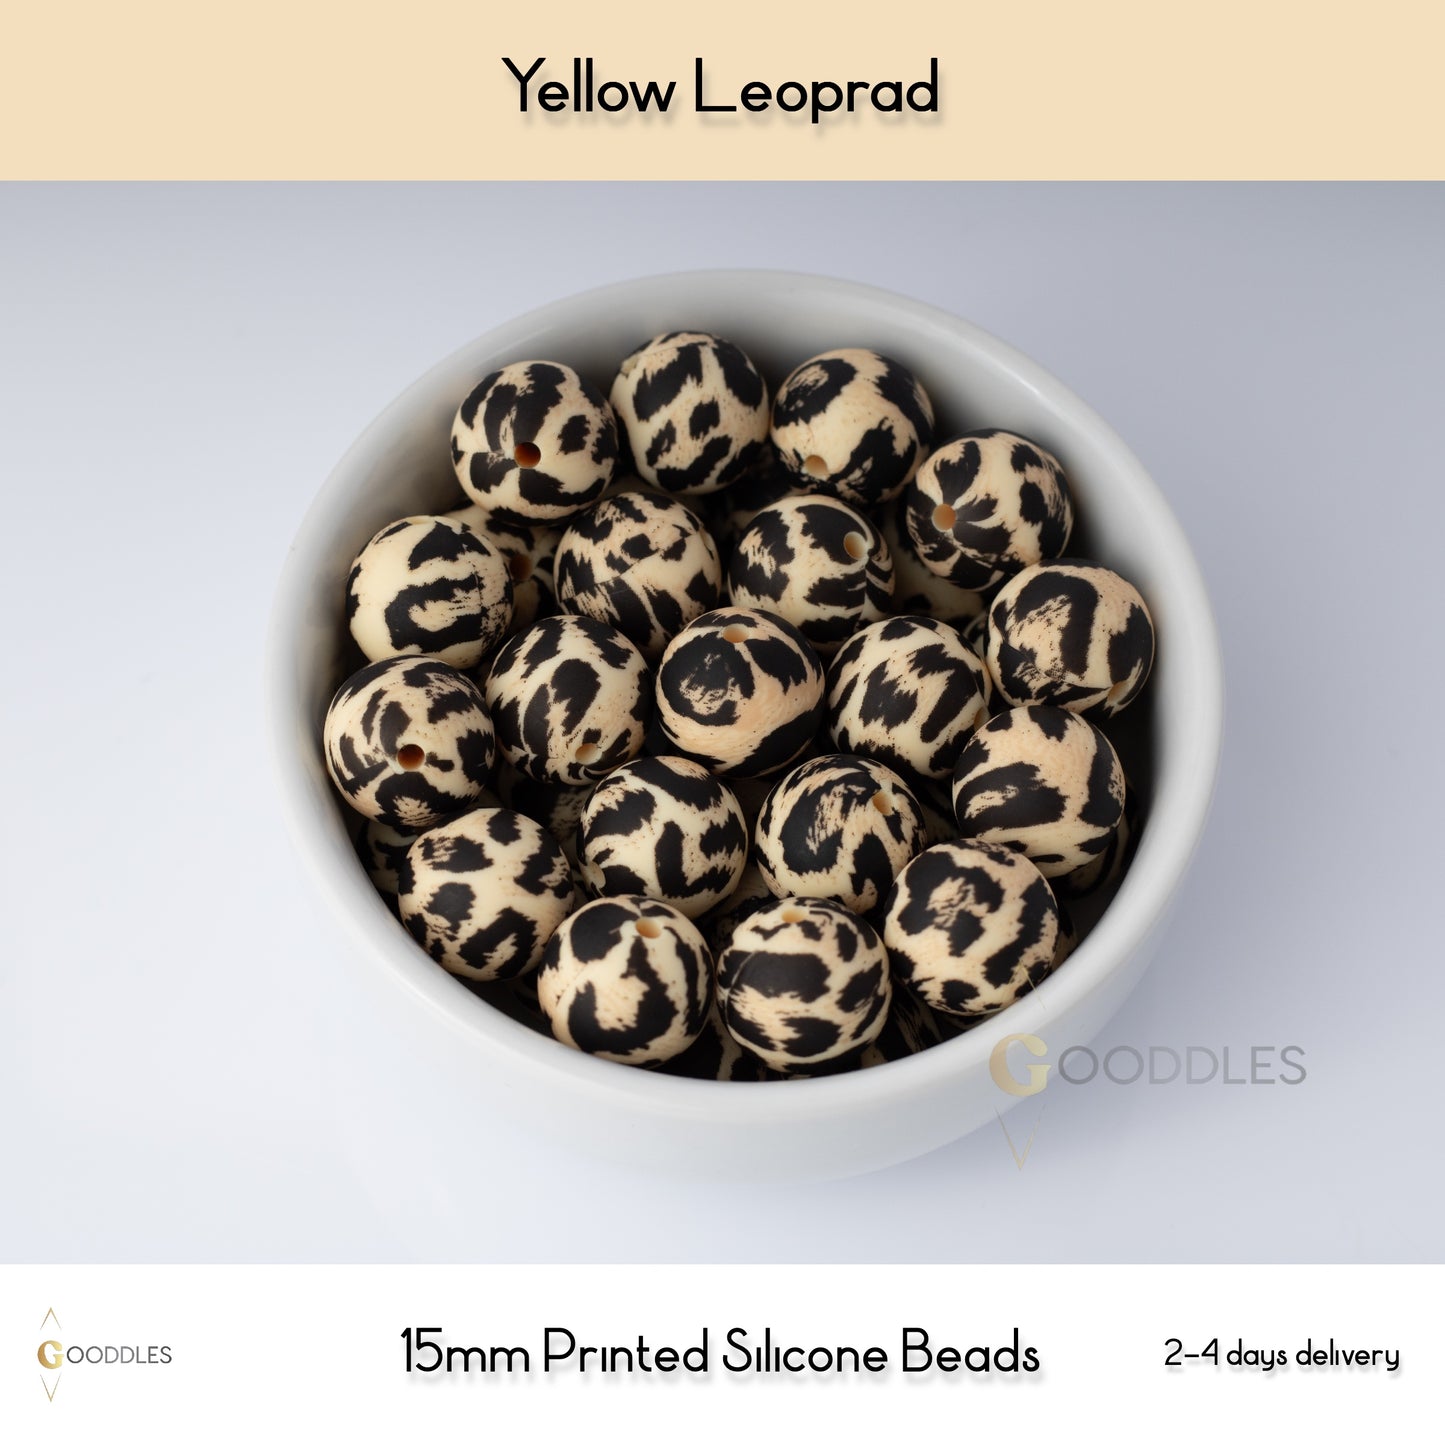 5pcs, Yellow Leopard Silicone Beads Printed Round Silicone Beads